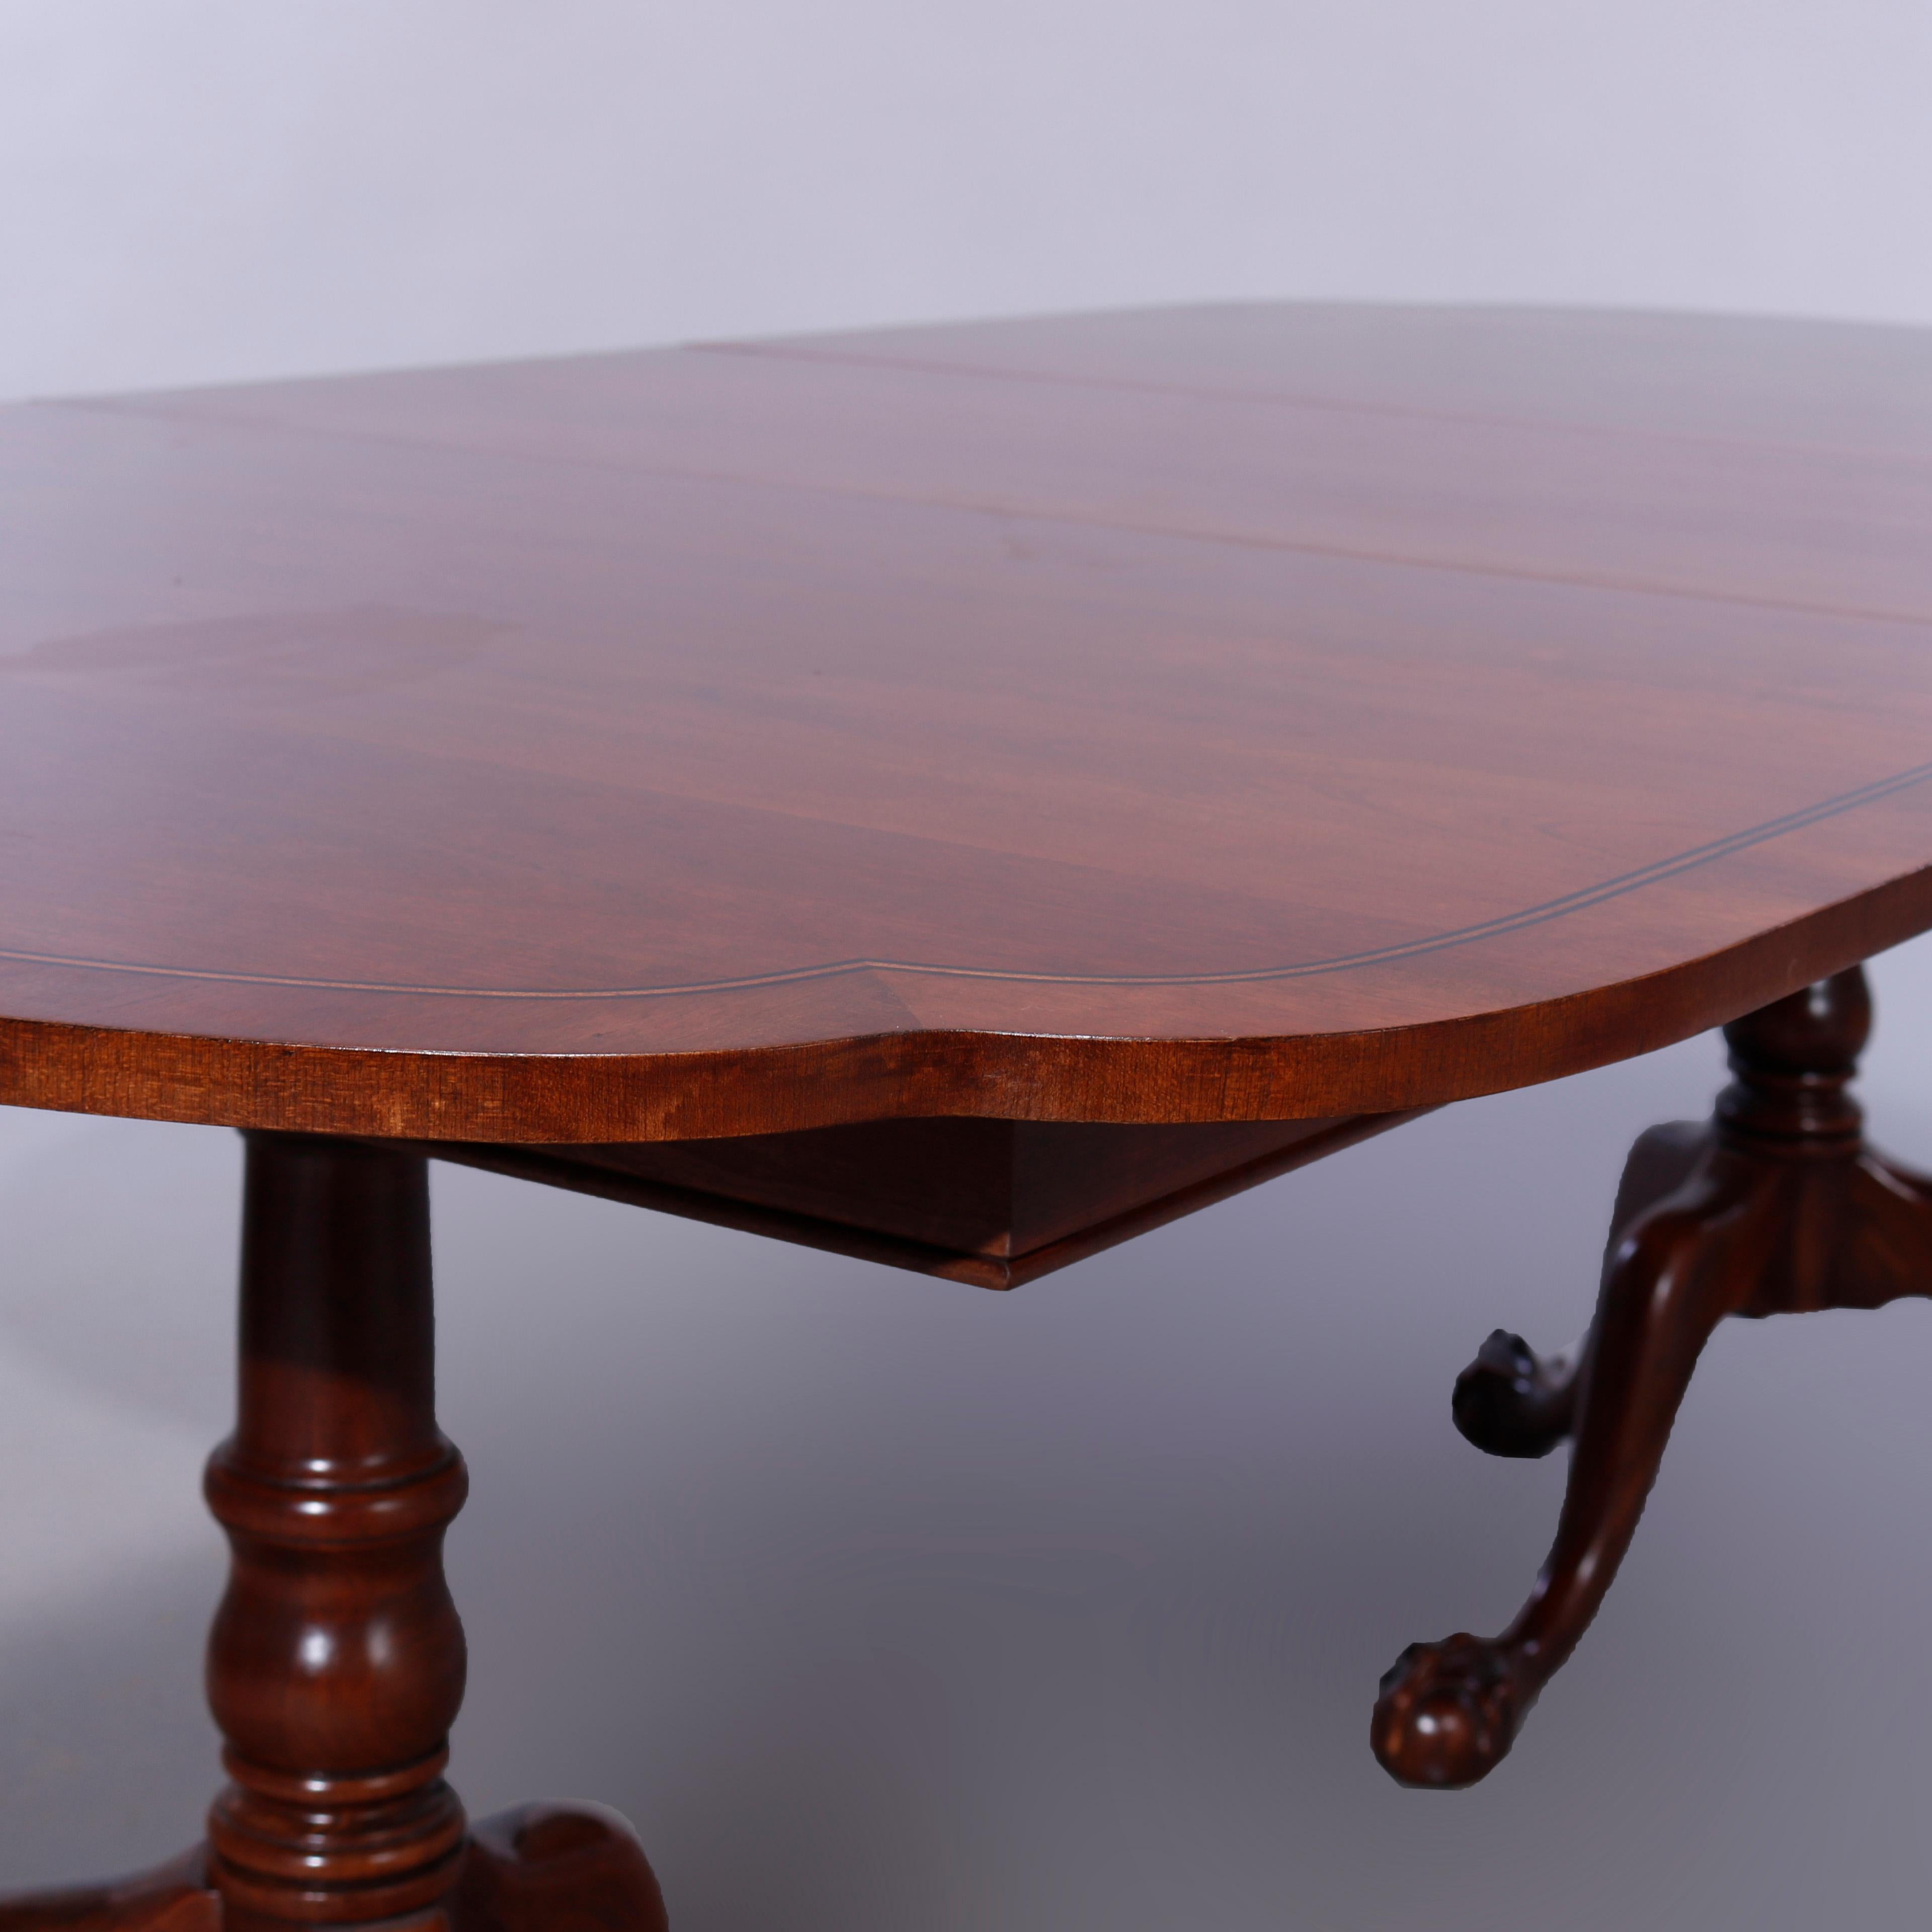 Antique Mahogany Chippendale Style Claw Foot Dining Table & Three Leaves c1930 5